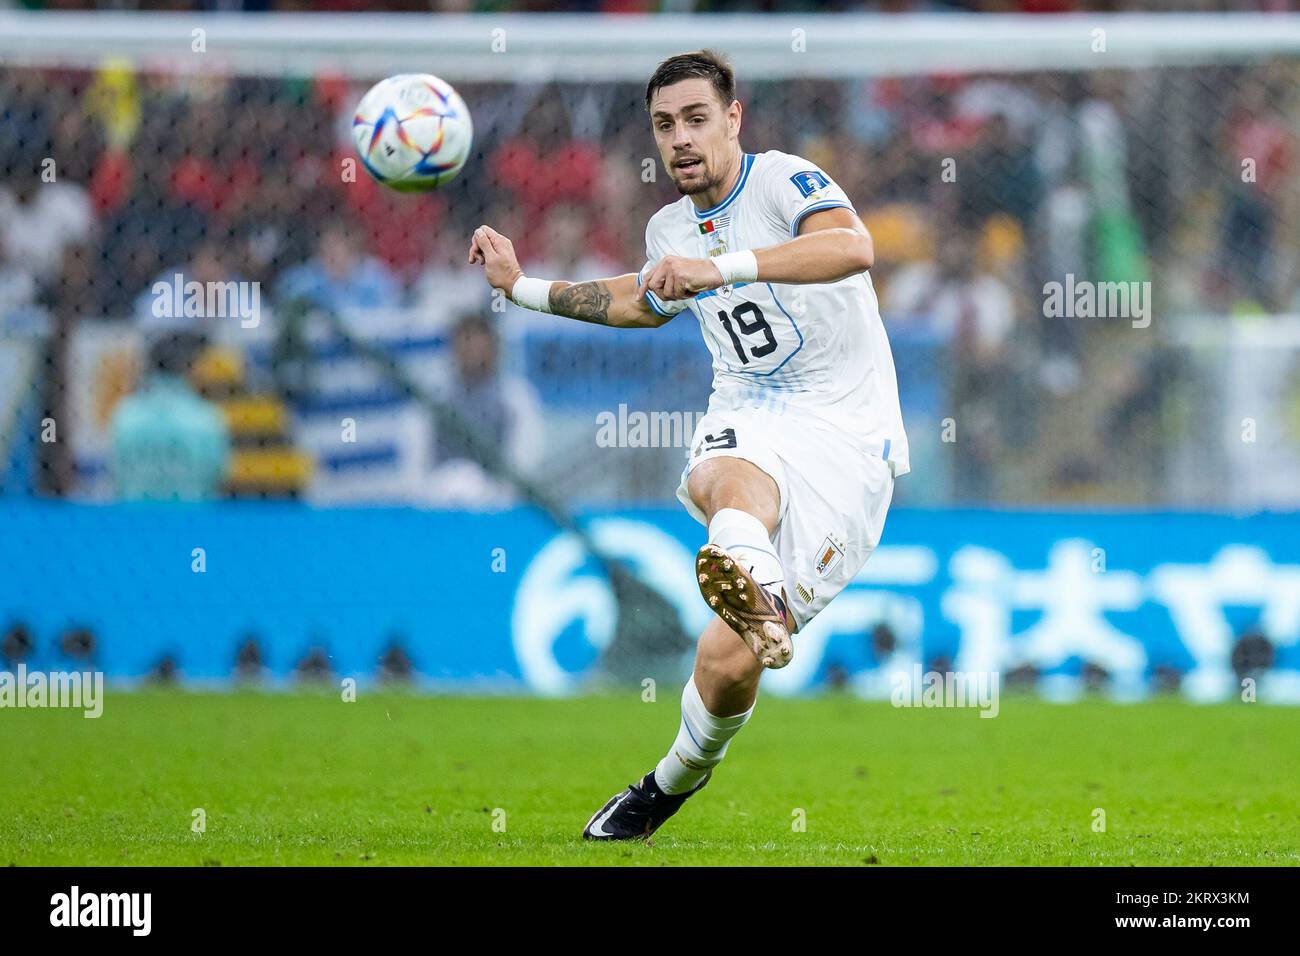 Lusail, Qatar. 28th Nov, 2022. Soccer: World Cup, Portugal - Uruguay, Preliminary round, Group H, Matchday 2, Lusail Iconic Stadium, Uruguay's Sebastian Coates in action. Credit: Tom Weller/dpa/Alamy Live News Stock Photo